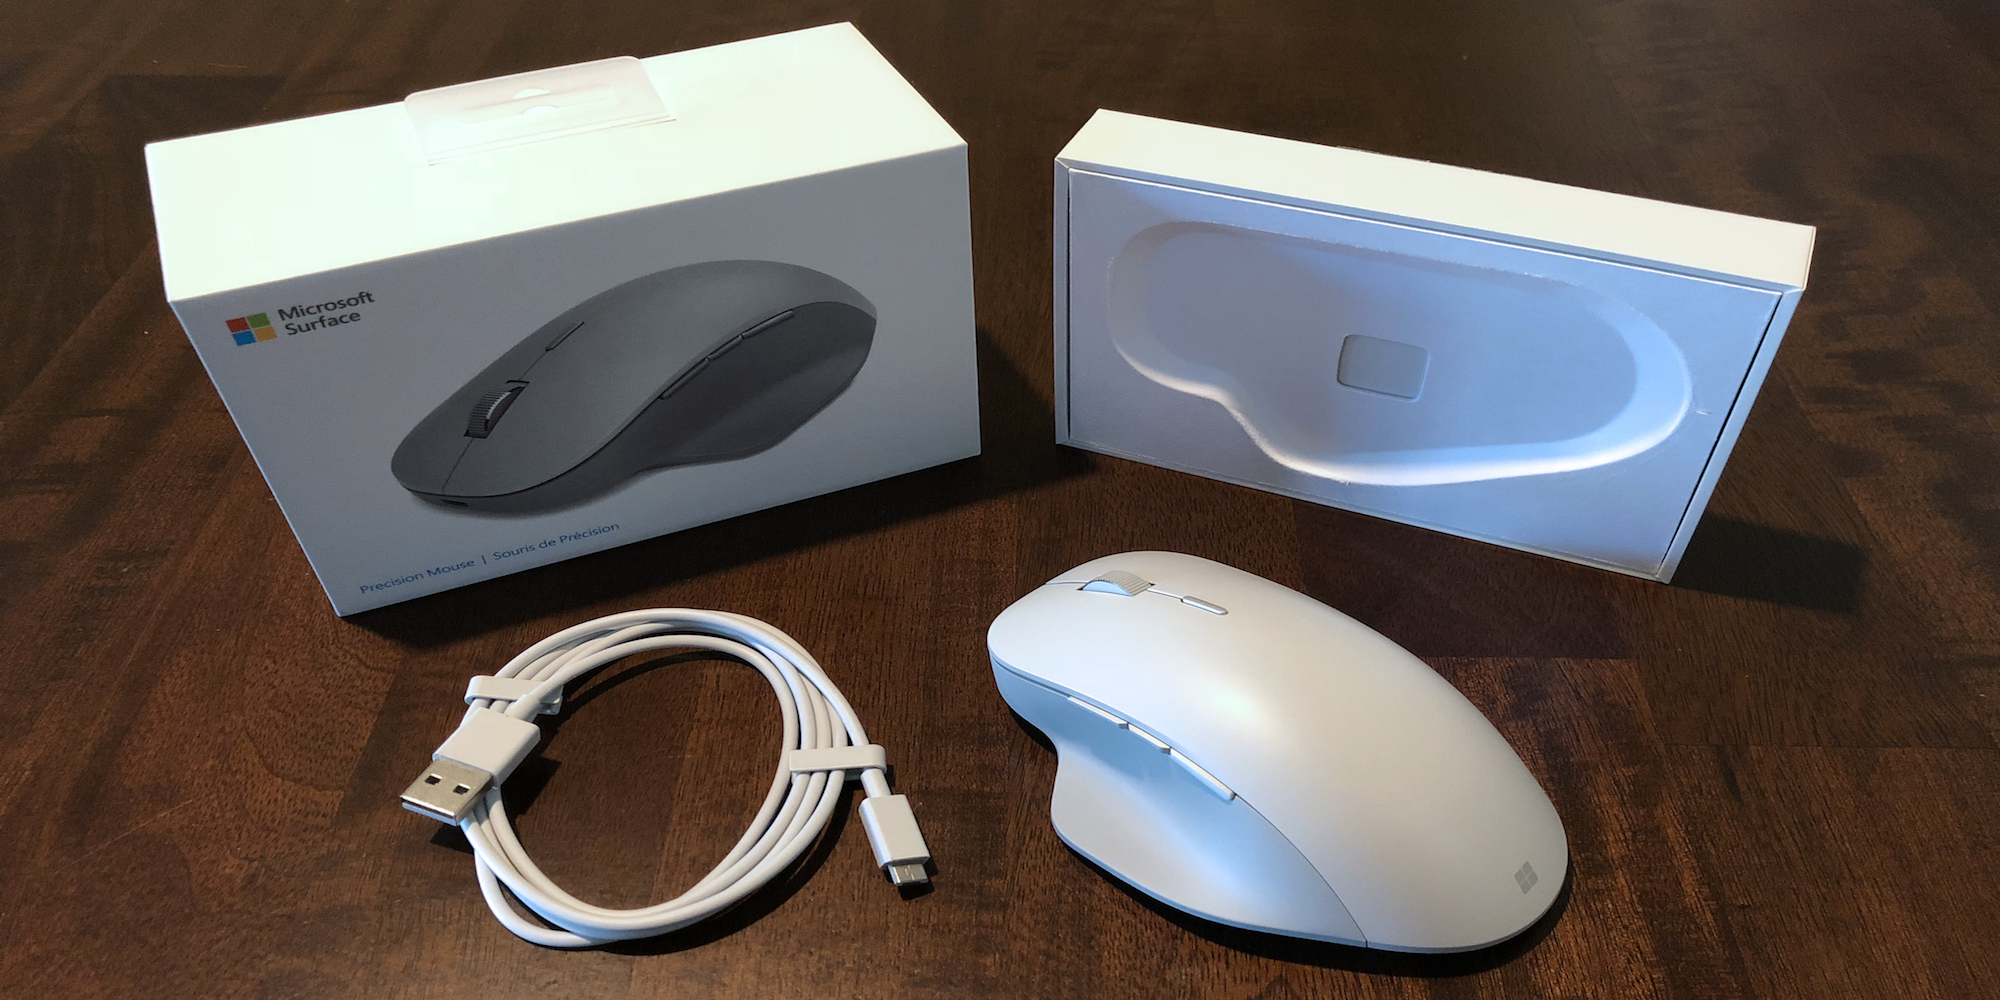 will microsoft wireless mouse work for mac